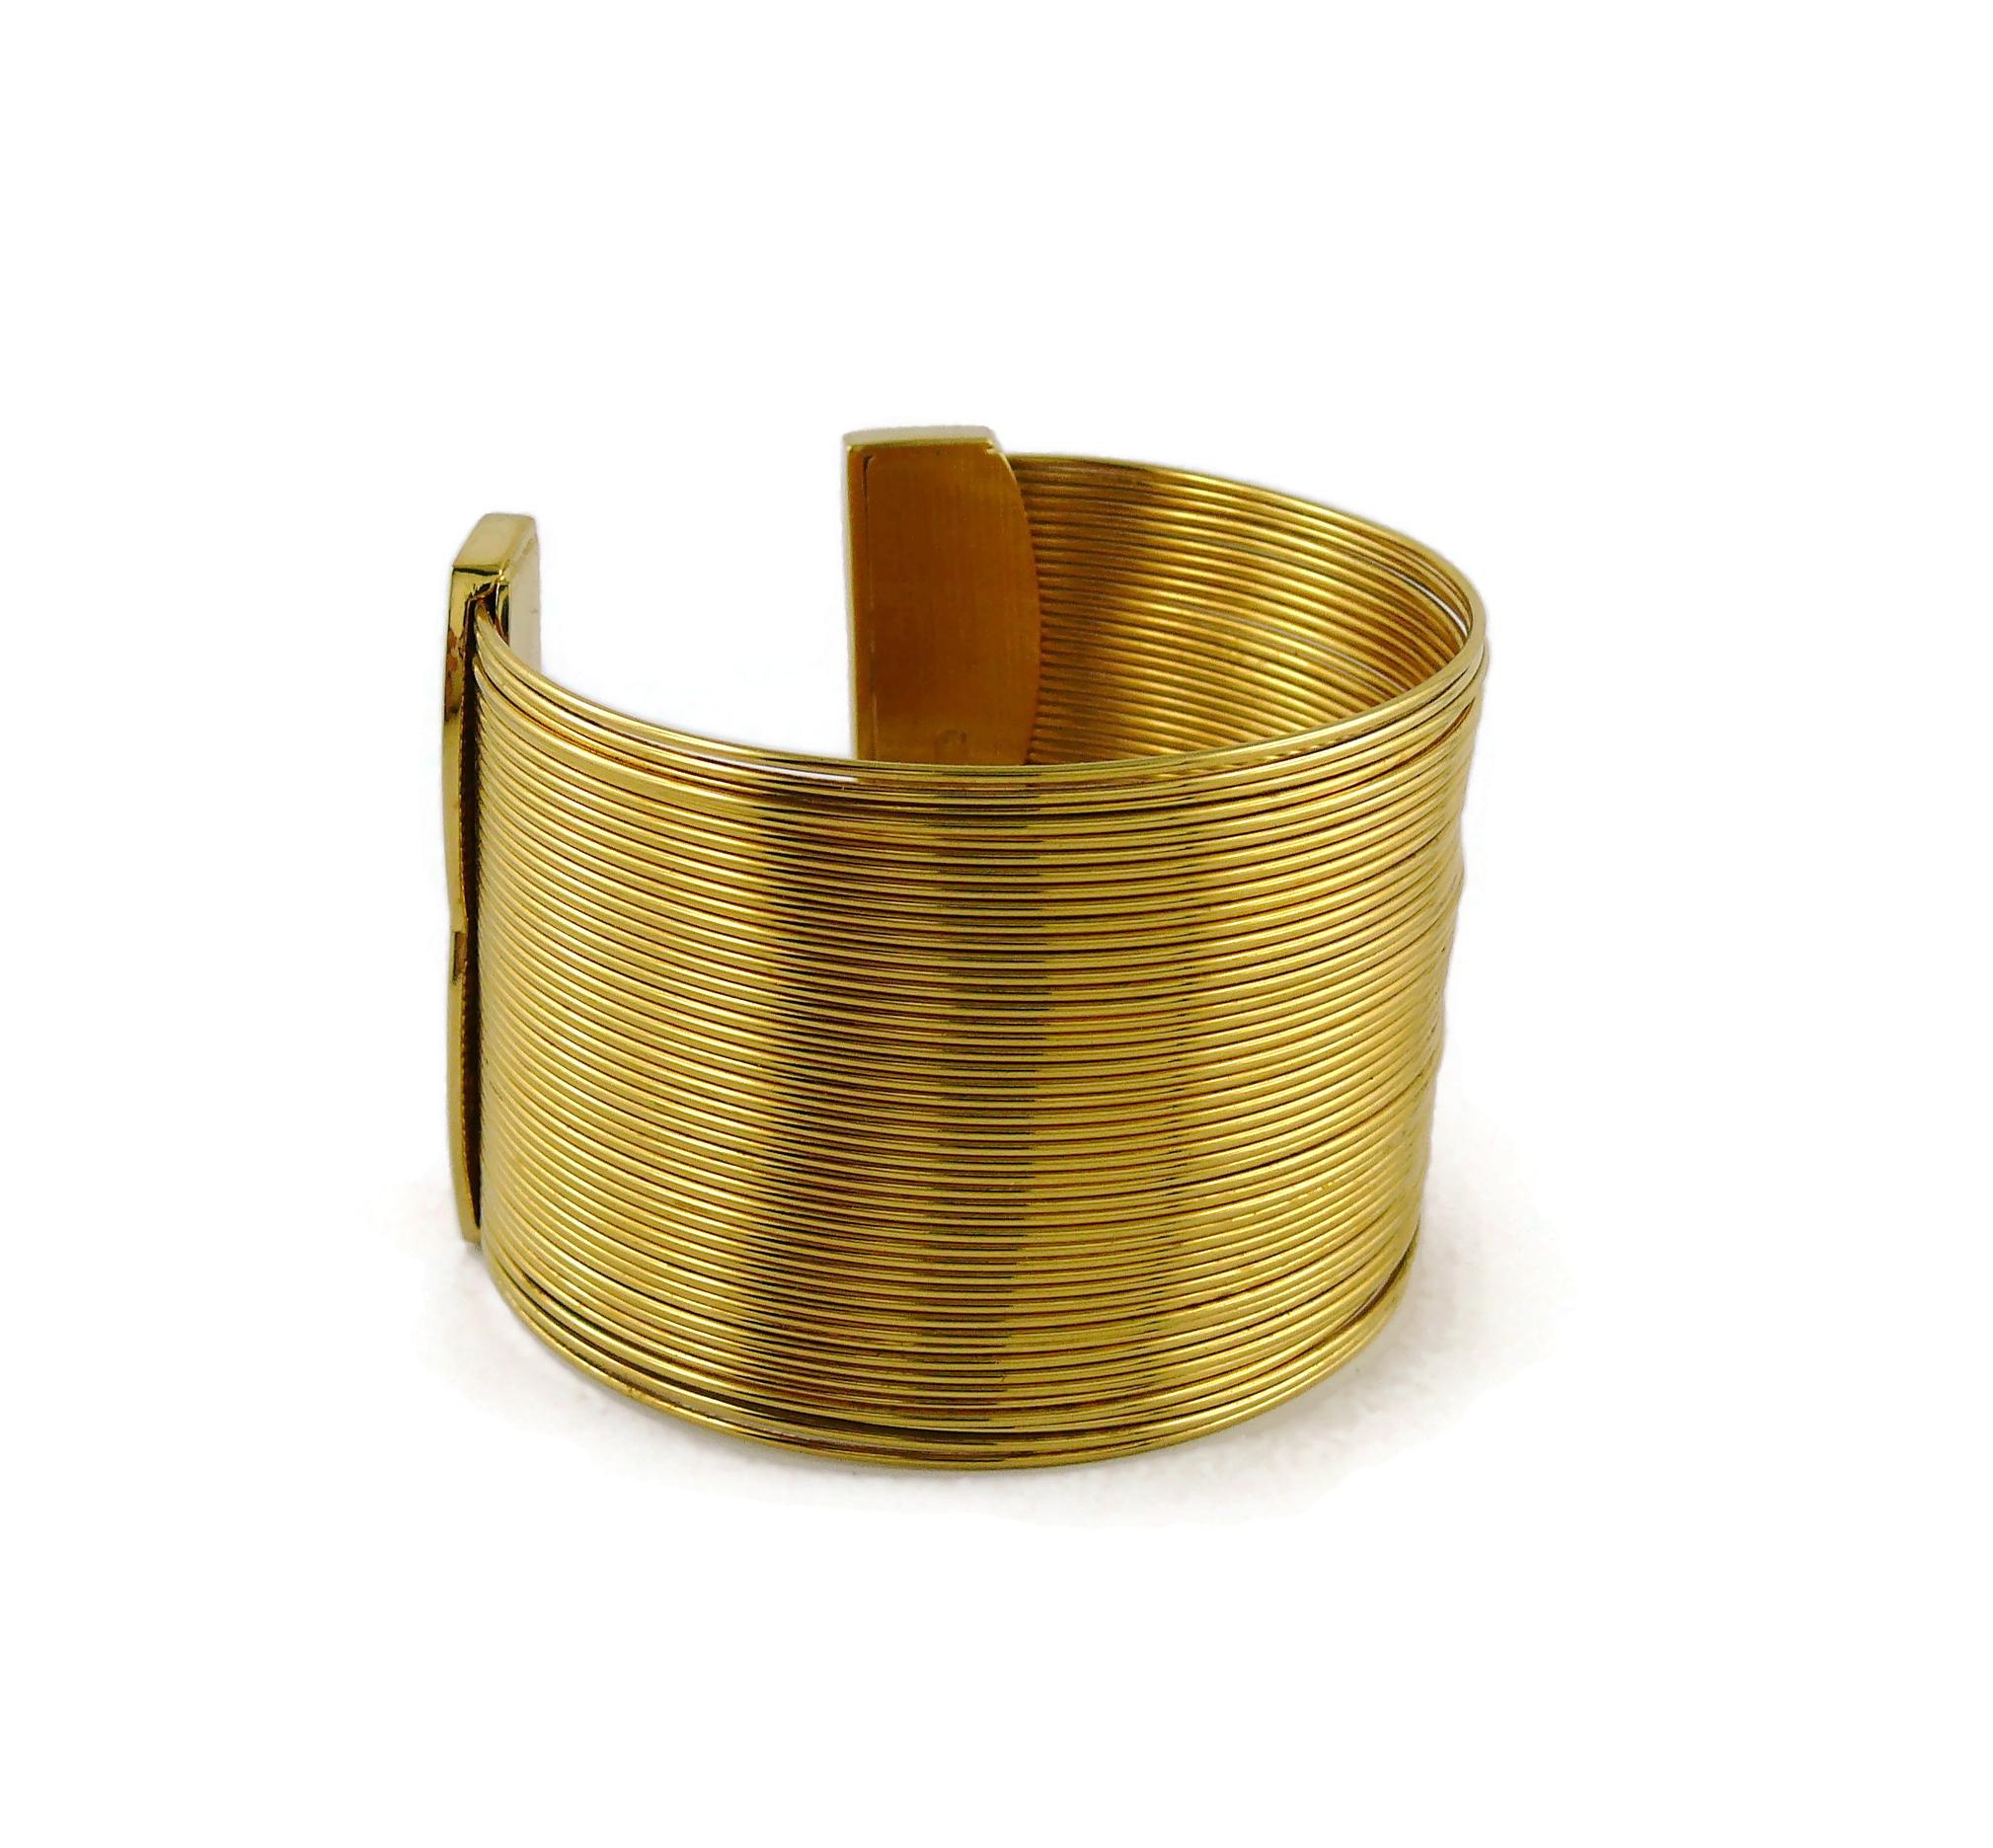 Christian Dior Vintage J'Adore Gold Toned Wire Cuff Bracelet 1